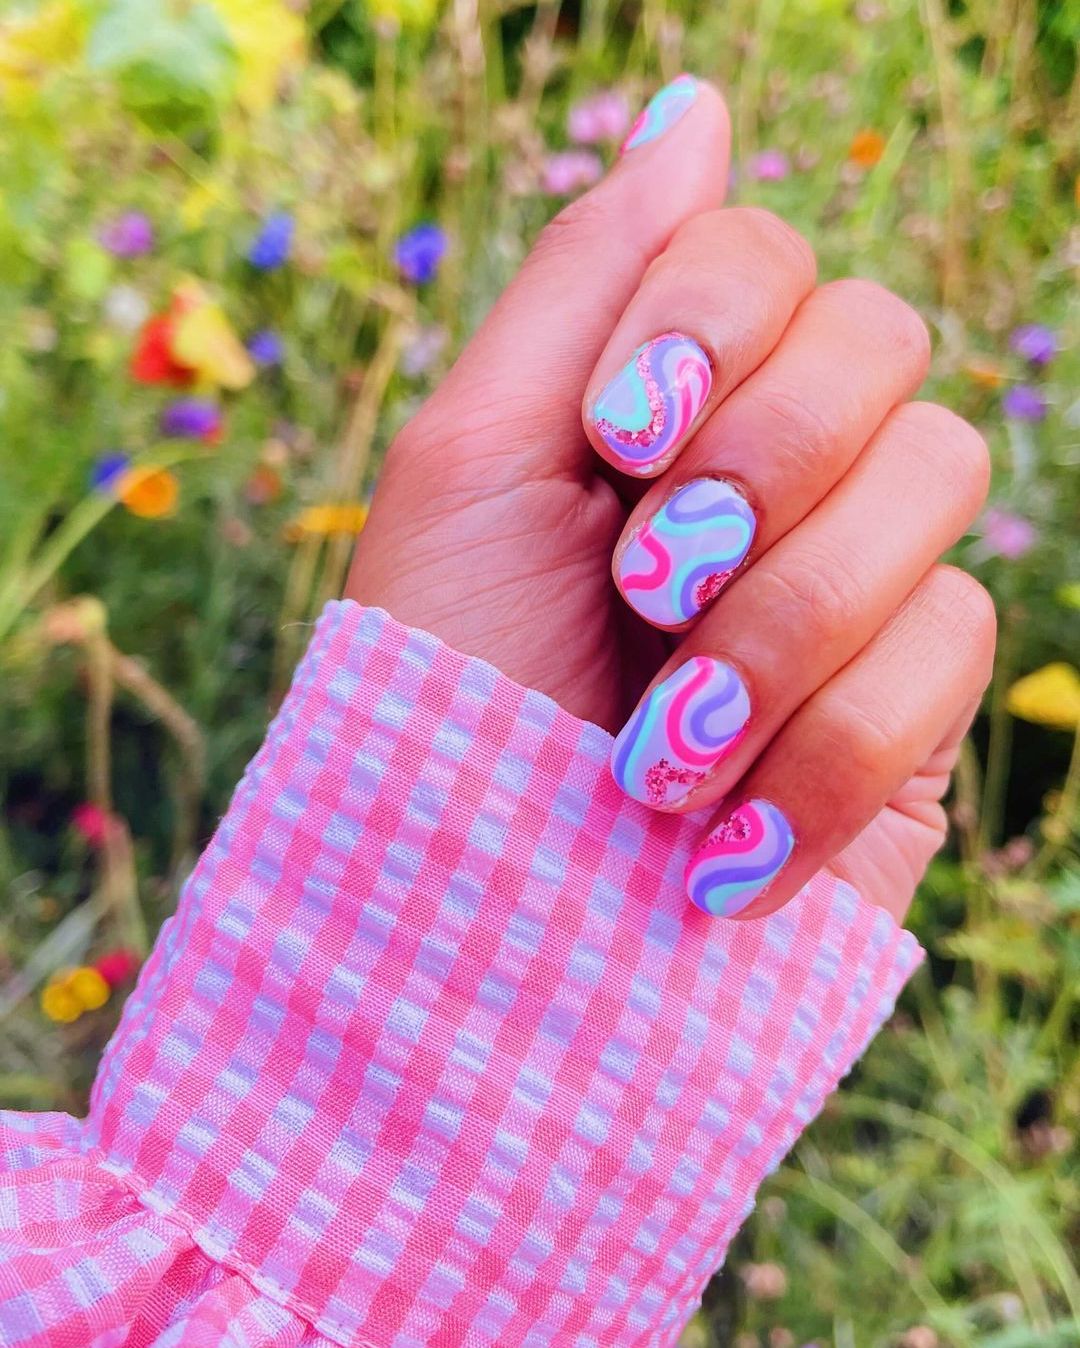 10 '70s-Inspired Nail Art Ideas for Your Manicure | Who What Wear UK